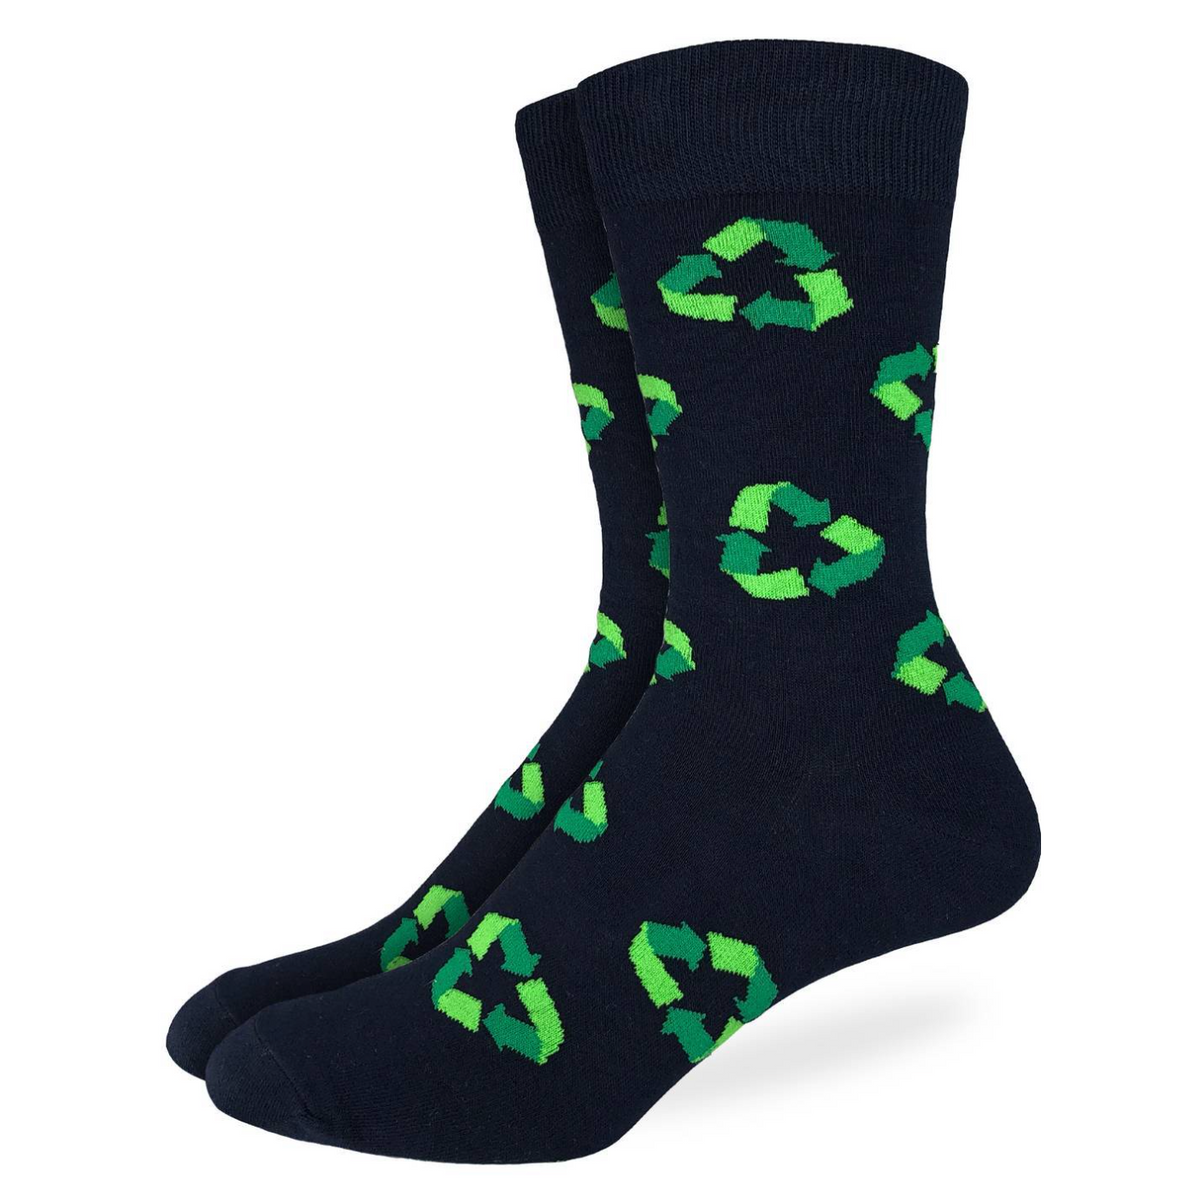 Good Luck Sock - Recycle